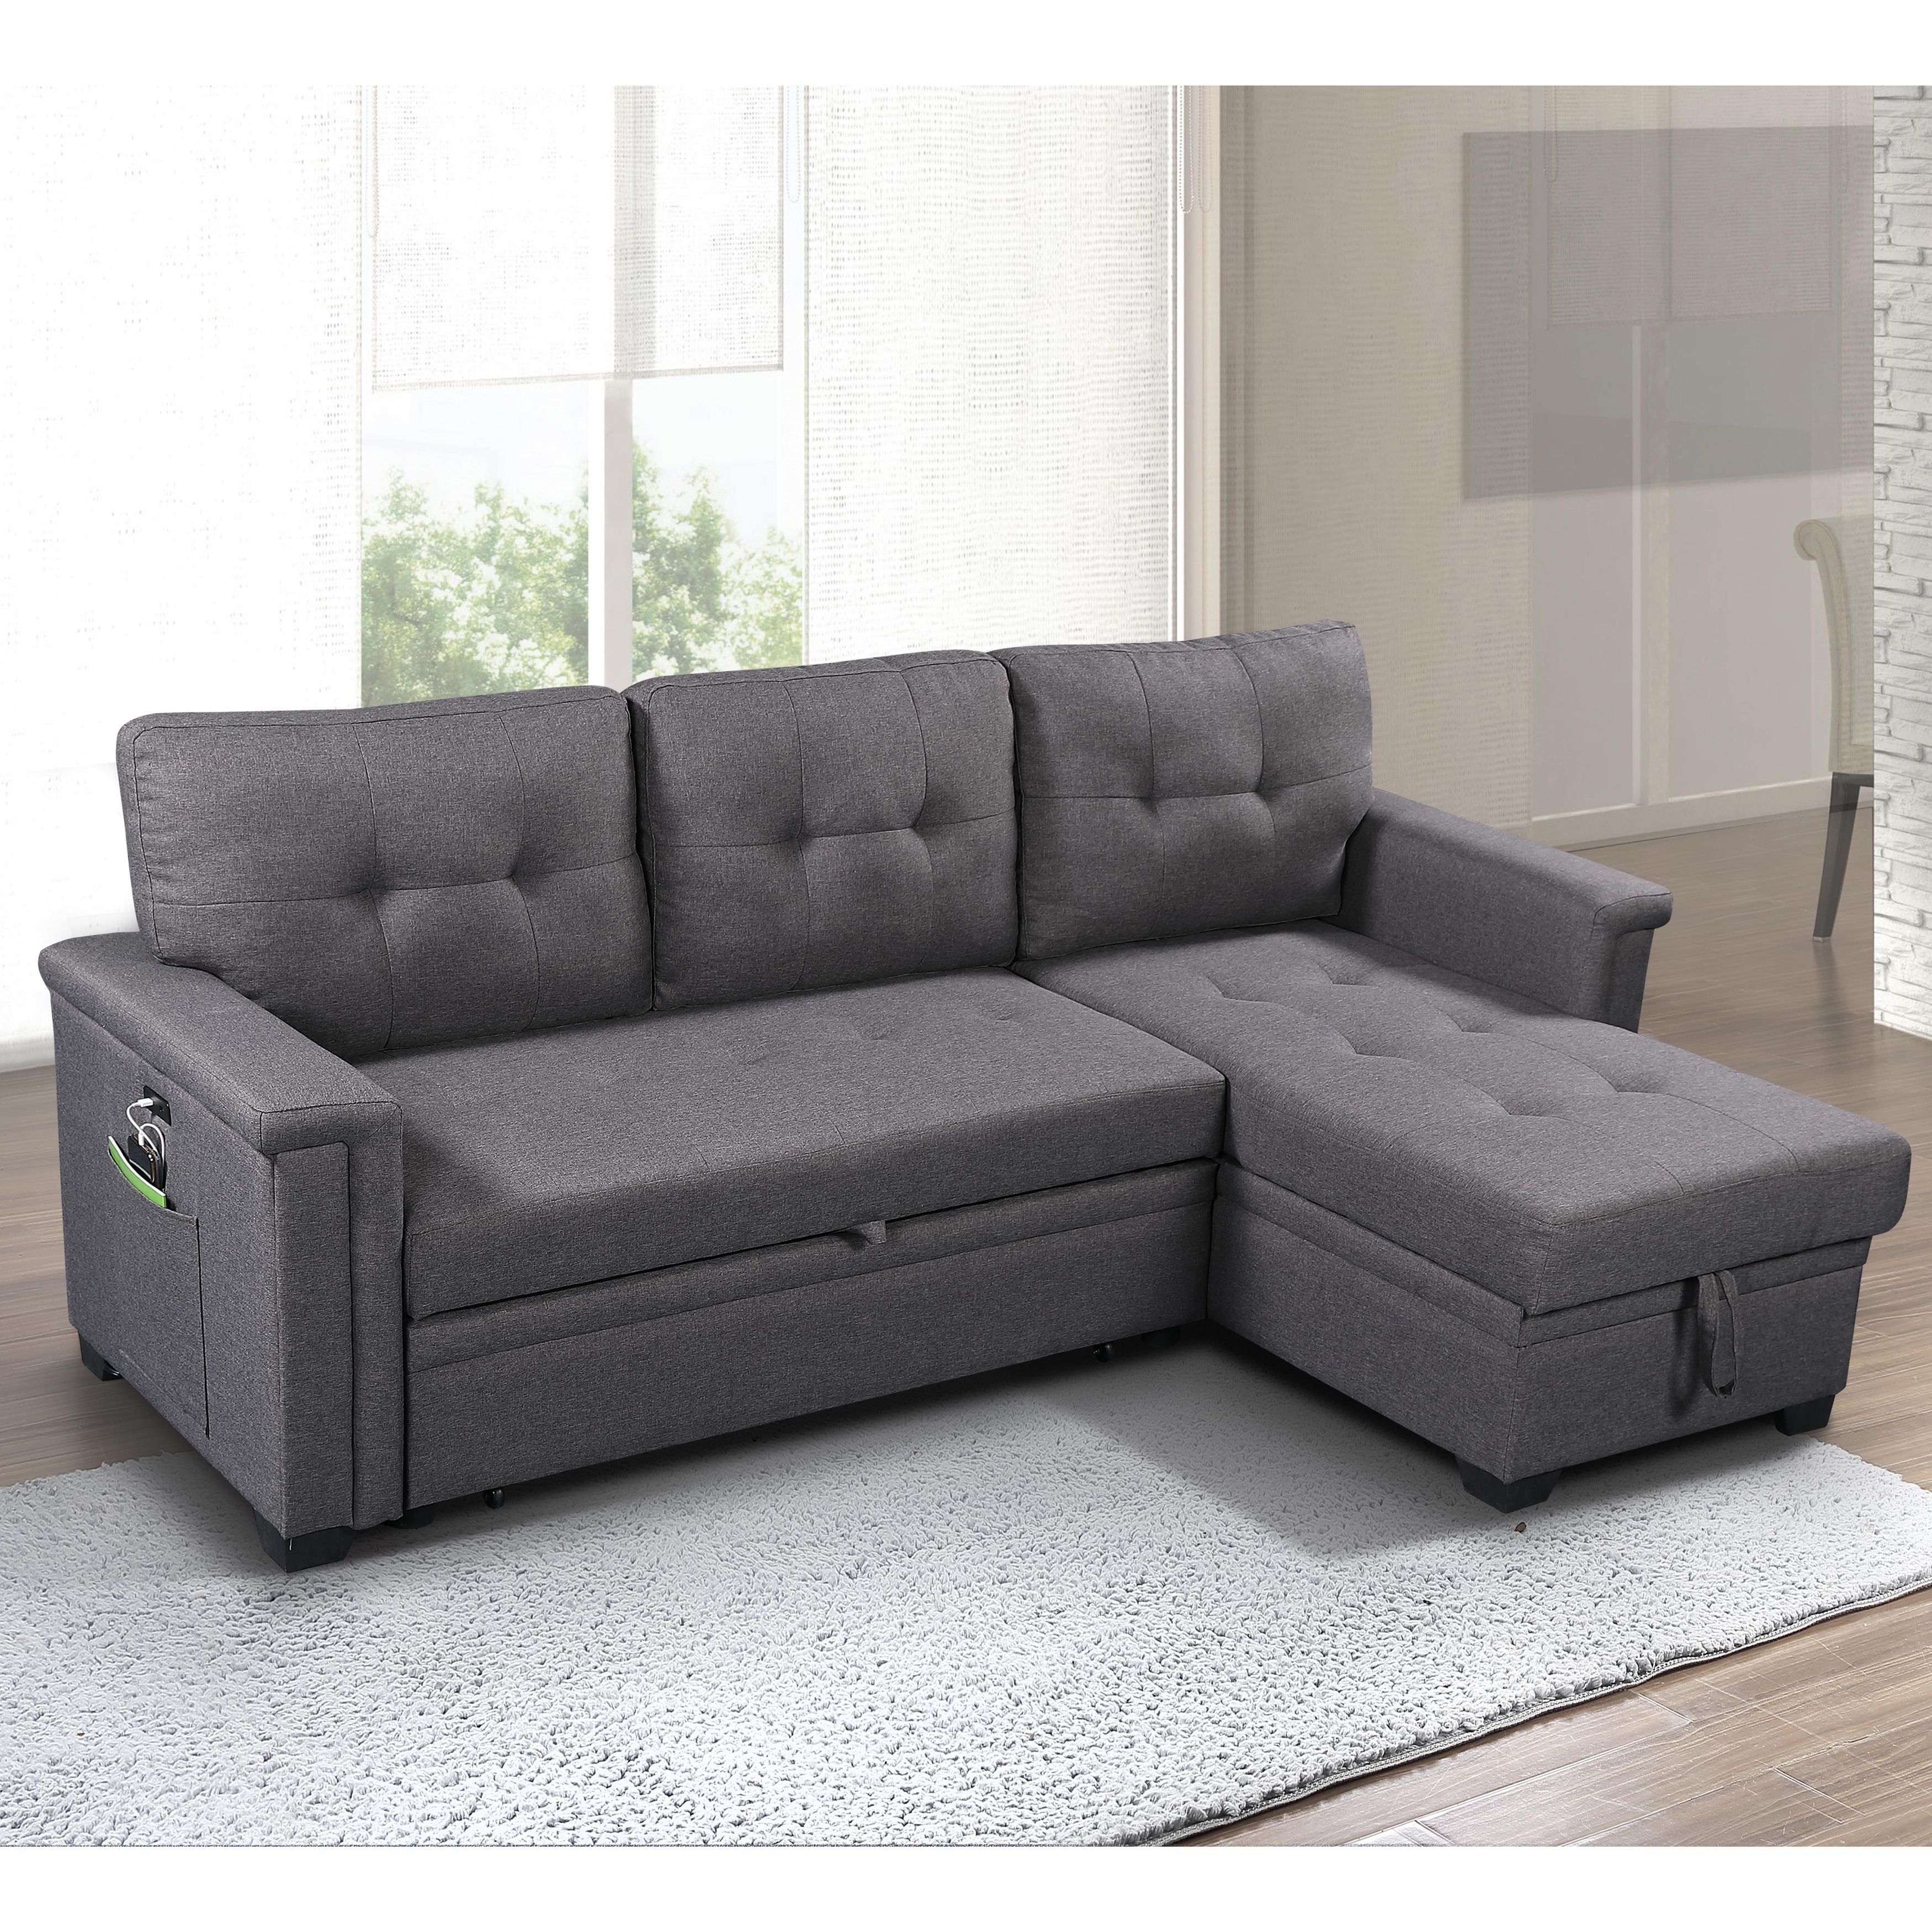 Ashlyn Reversible Sleeper Sofa With Storage Chaise – – 30144937 Pertaining To Convertible Sofa With Matching Chaise (View 2 of 20)